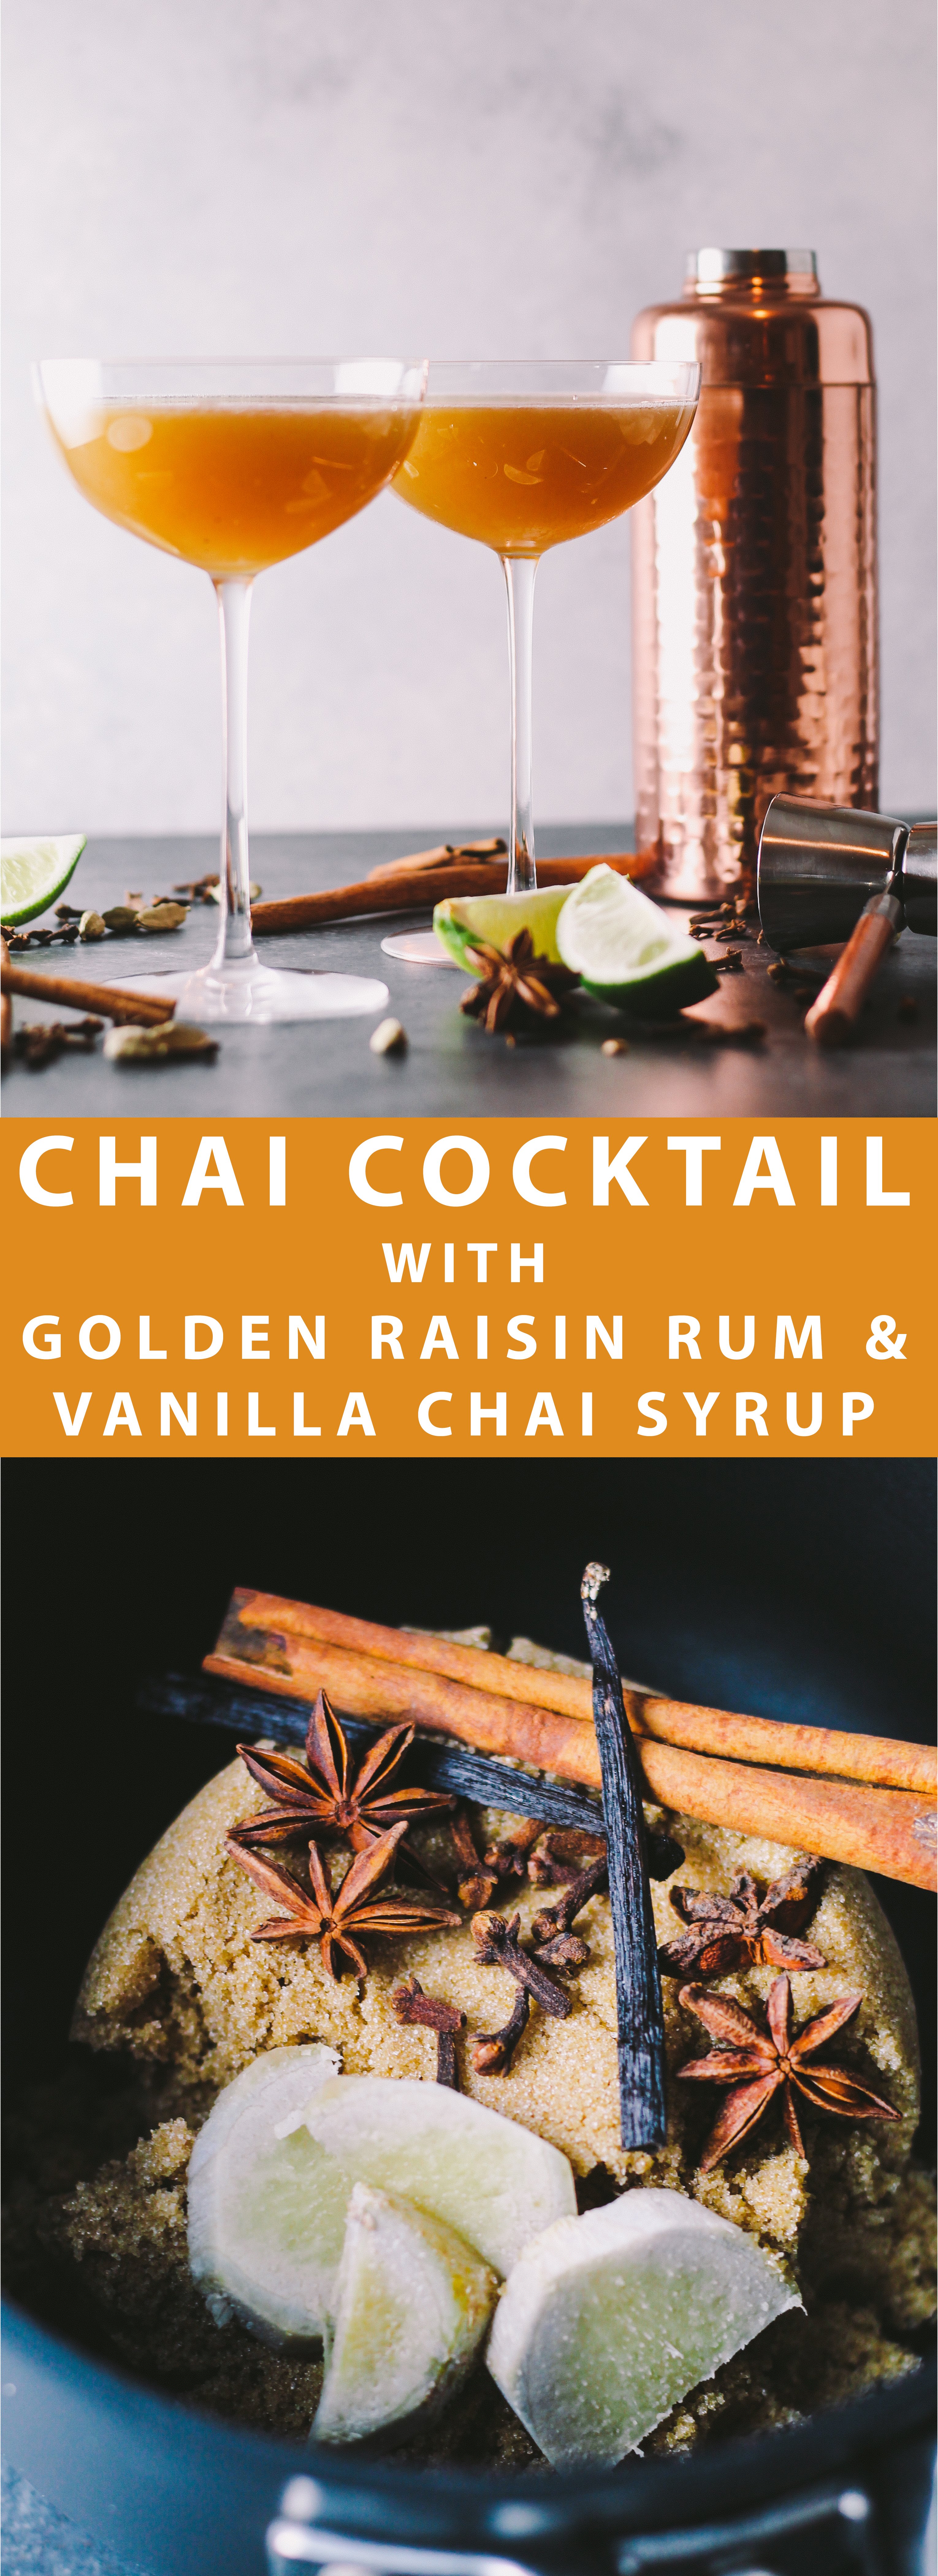 chai cocktail | cocktail | hygge ideas | date night | a chai cocktail with golden raisin-infused spiced rum & a homemade vanilla chai simple syrup. this chai cocktail is just as perfect for date night at home as it is for celebrating with friends & loved ones this winter season.